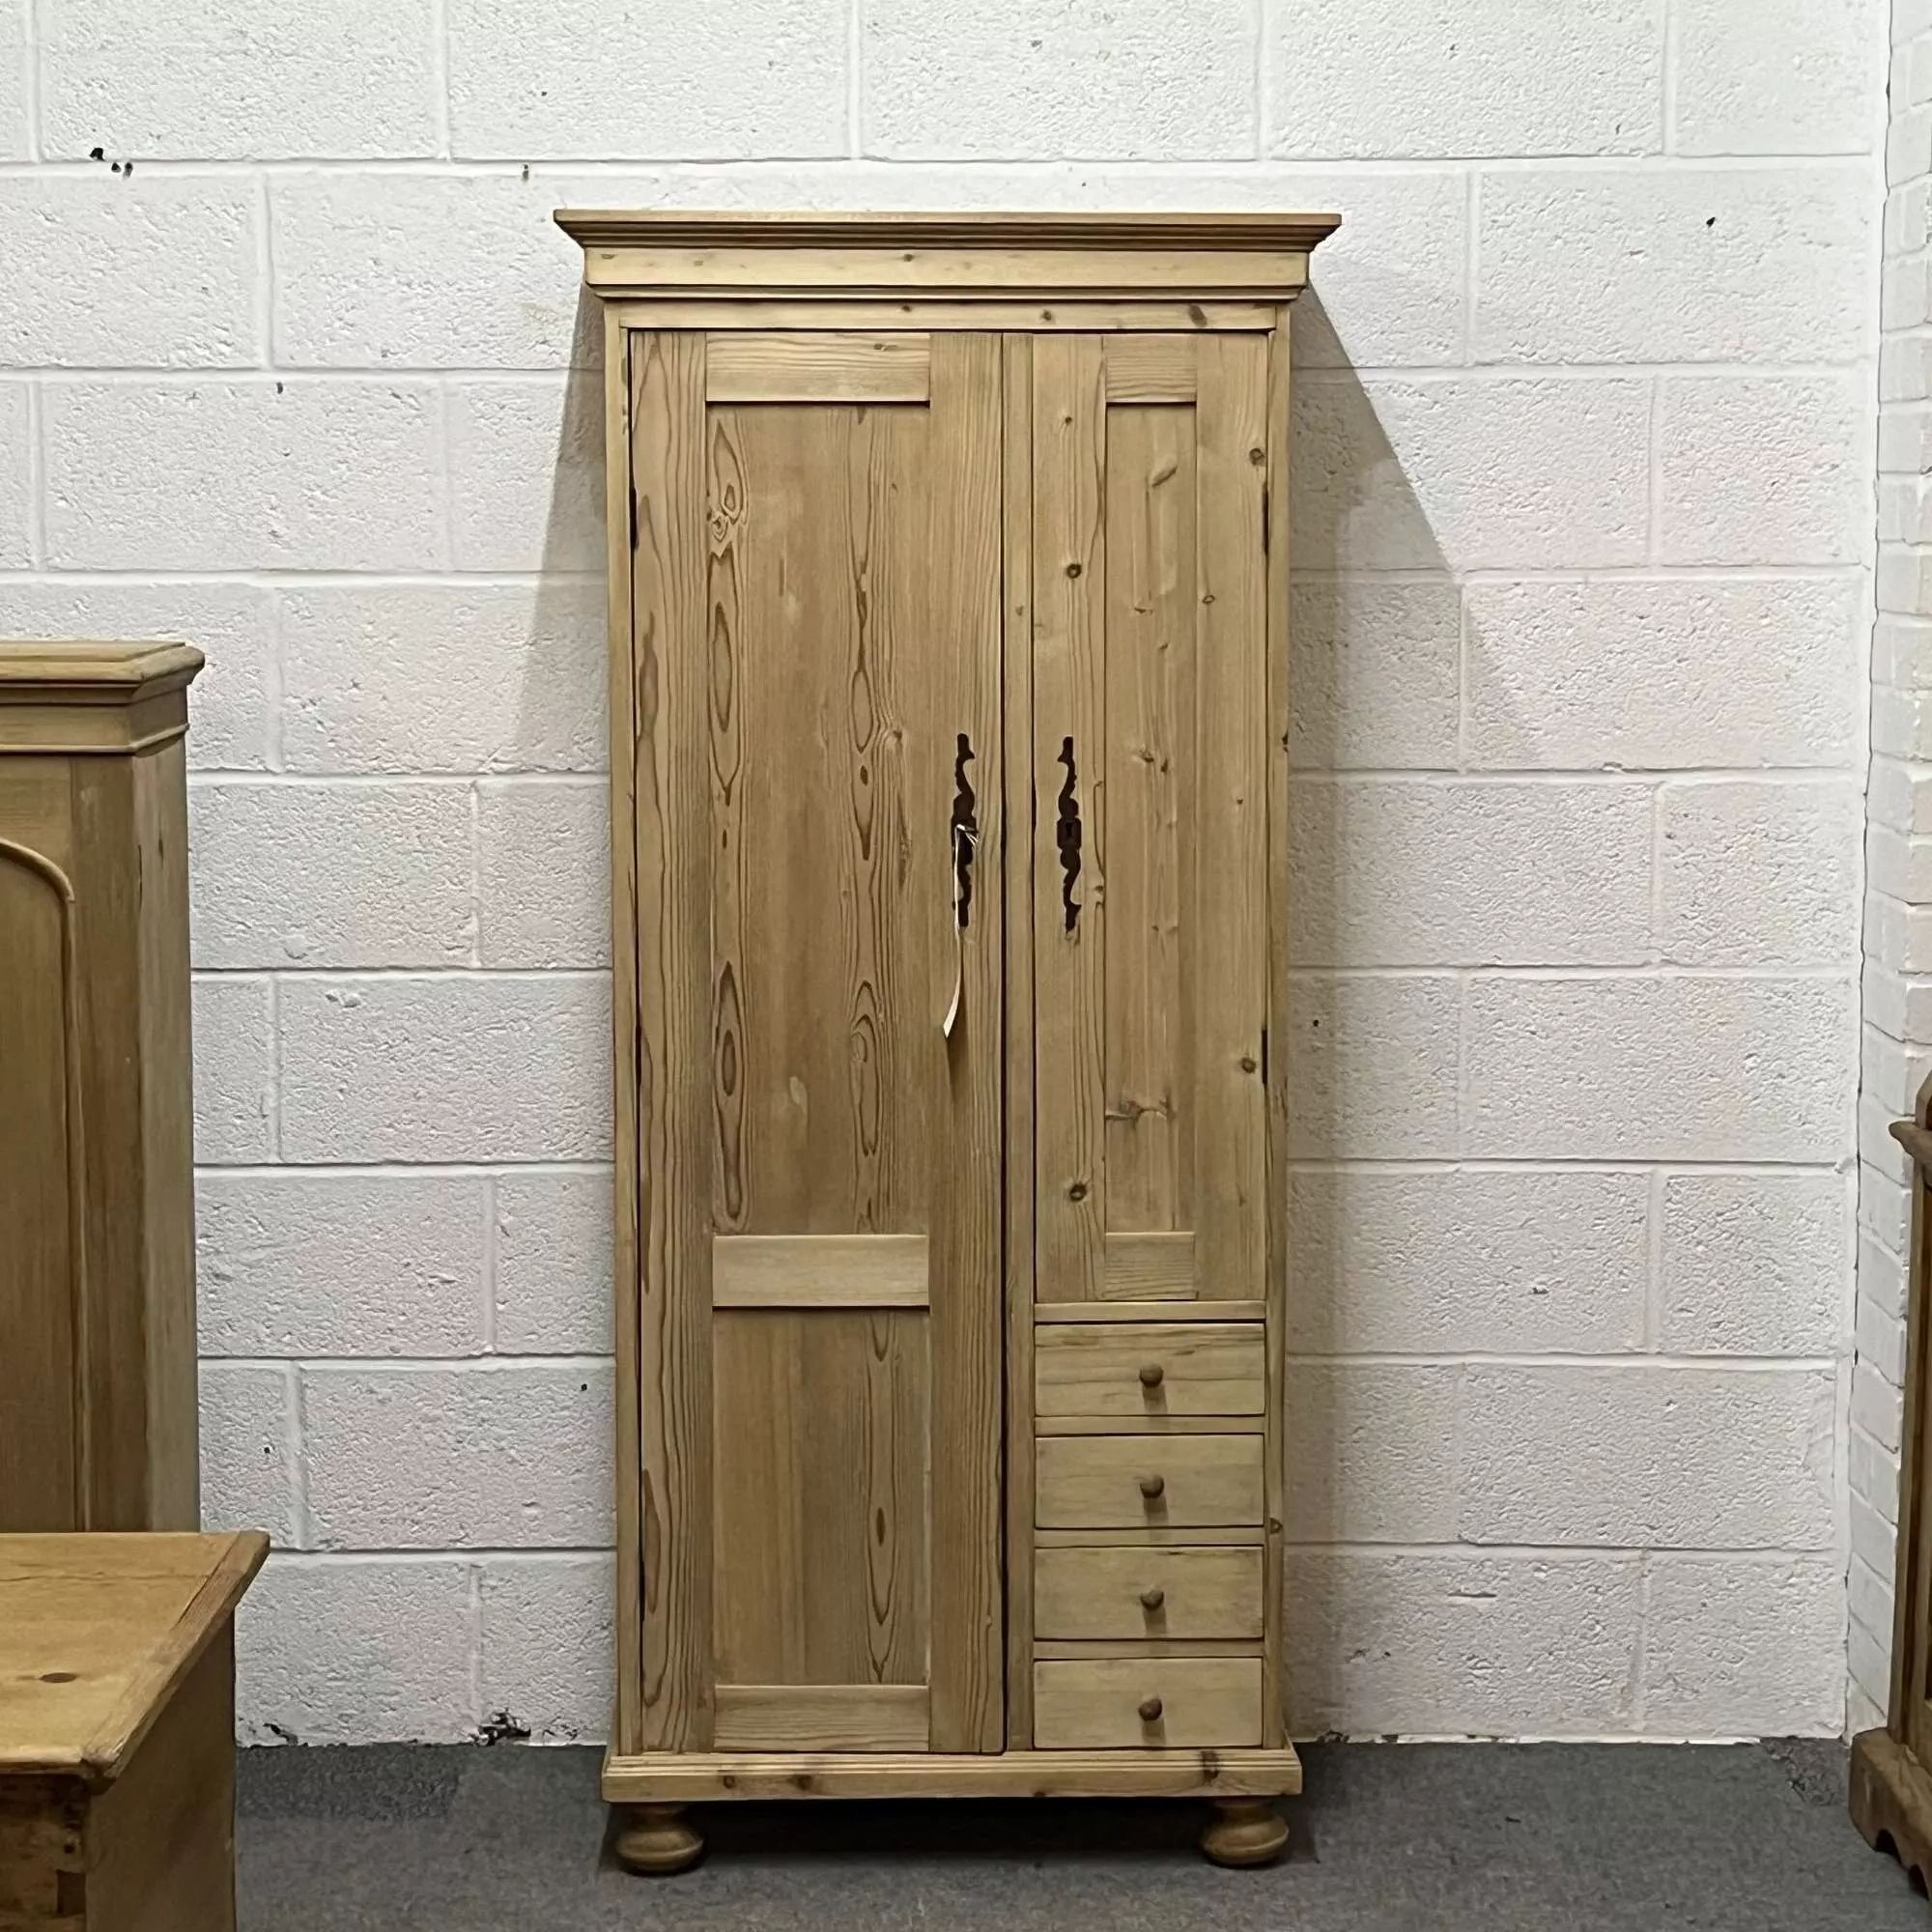 Tall Slim 2 Door Pine Cupboard With Drawers In Antique Cupboards Inside Pine Wardrobes With Drawers And Shelves (View 18 of 20)